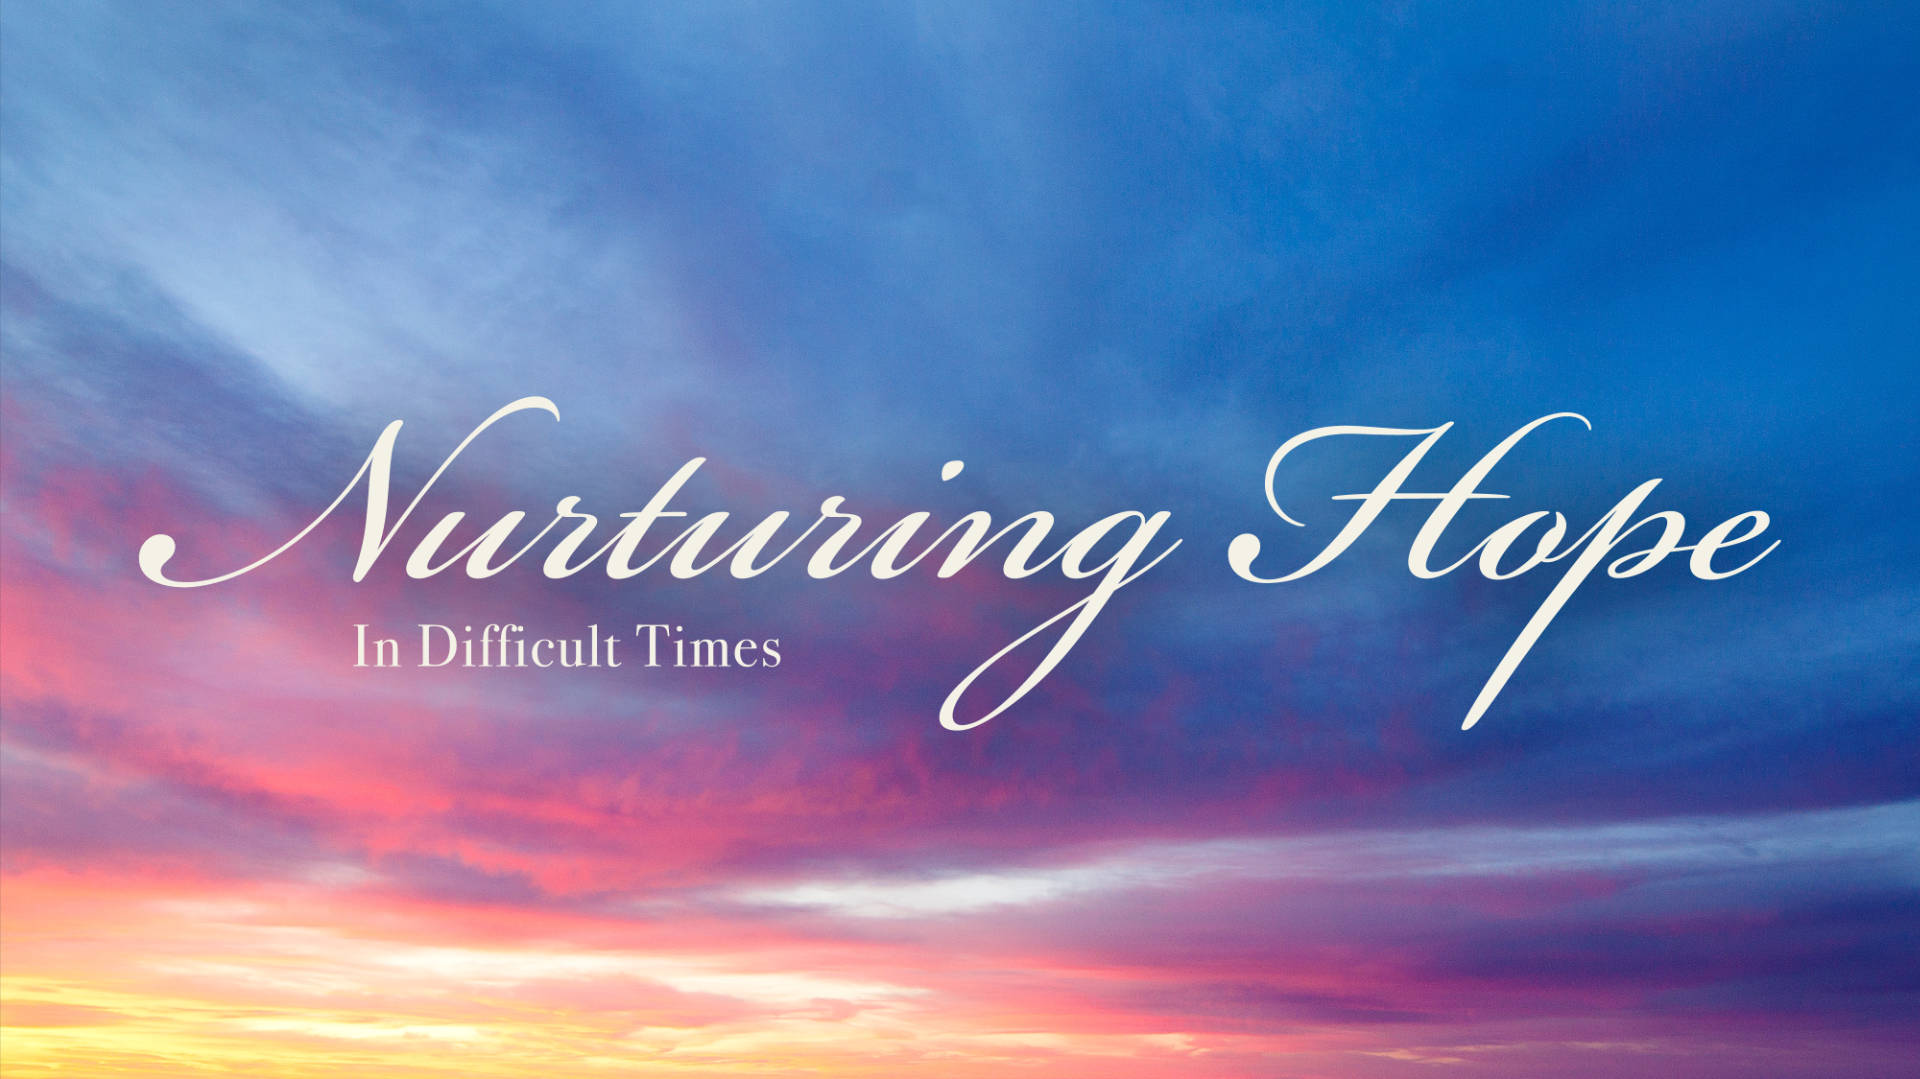 Nurturing Hope in Difficult Times